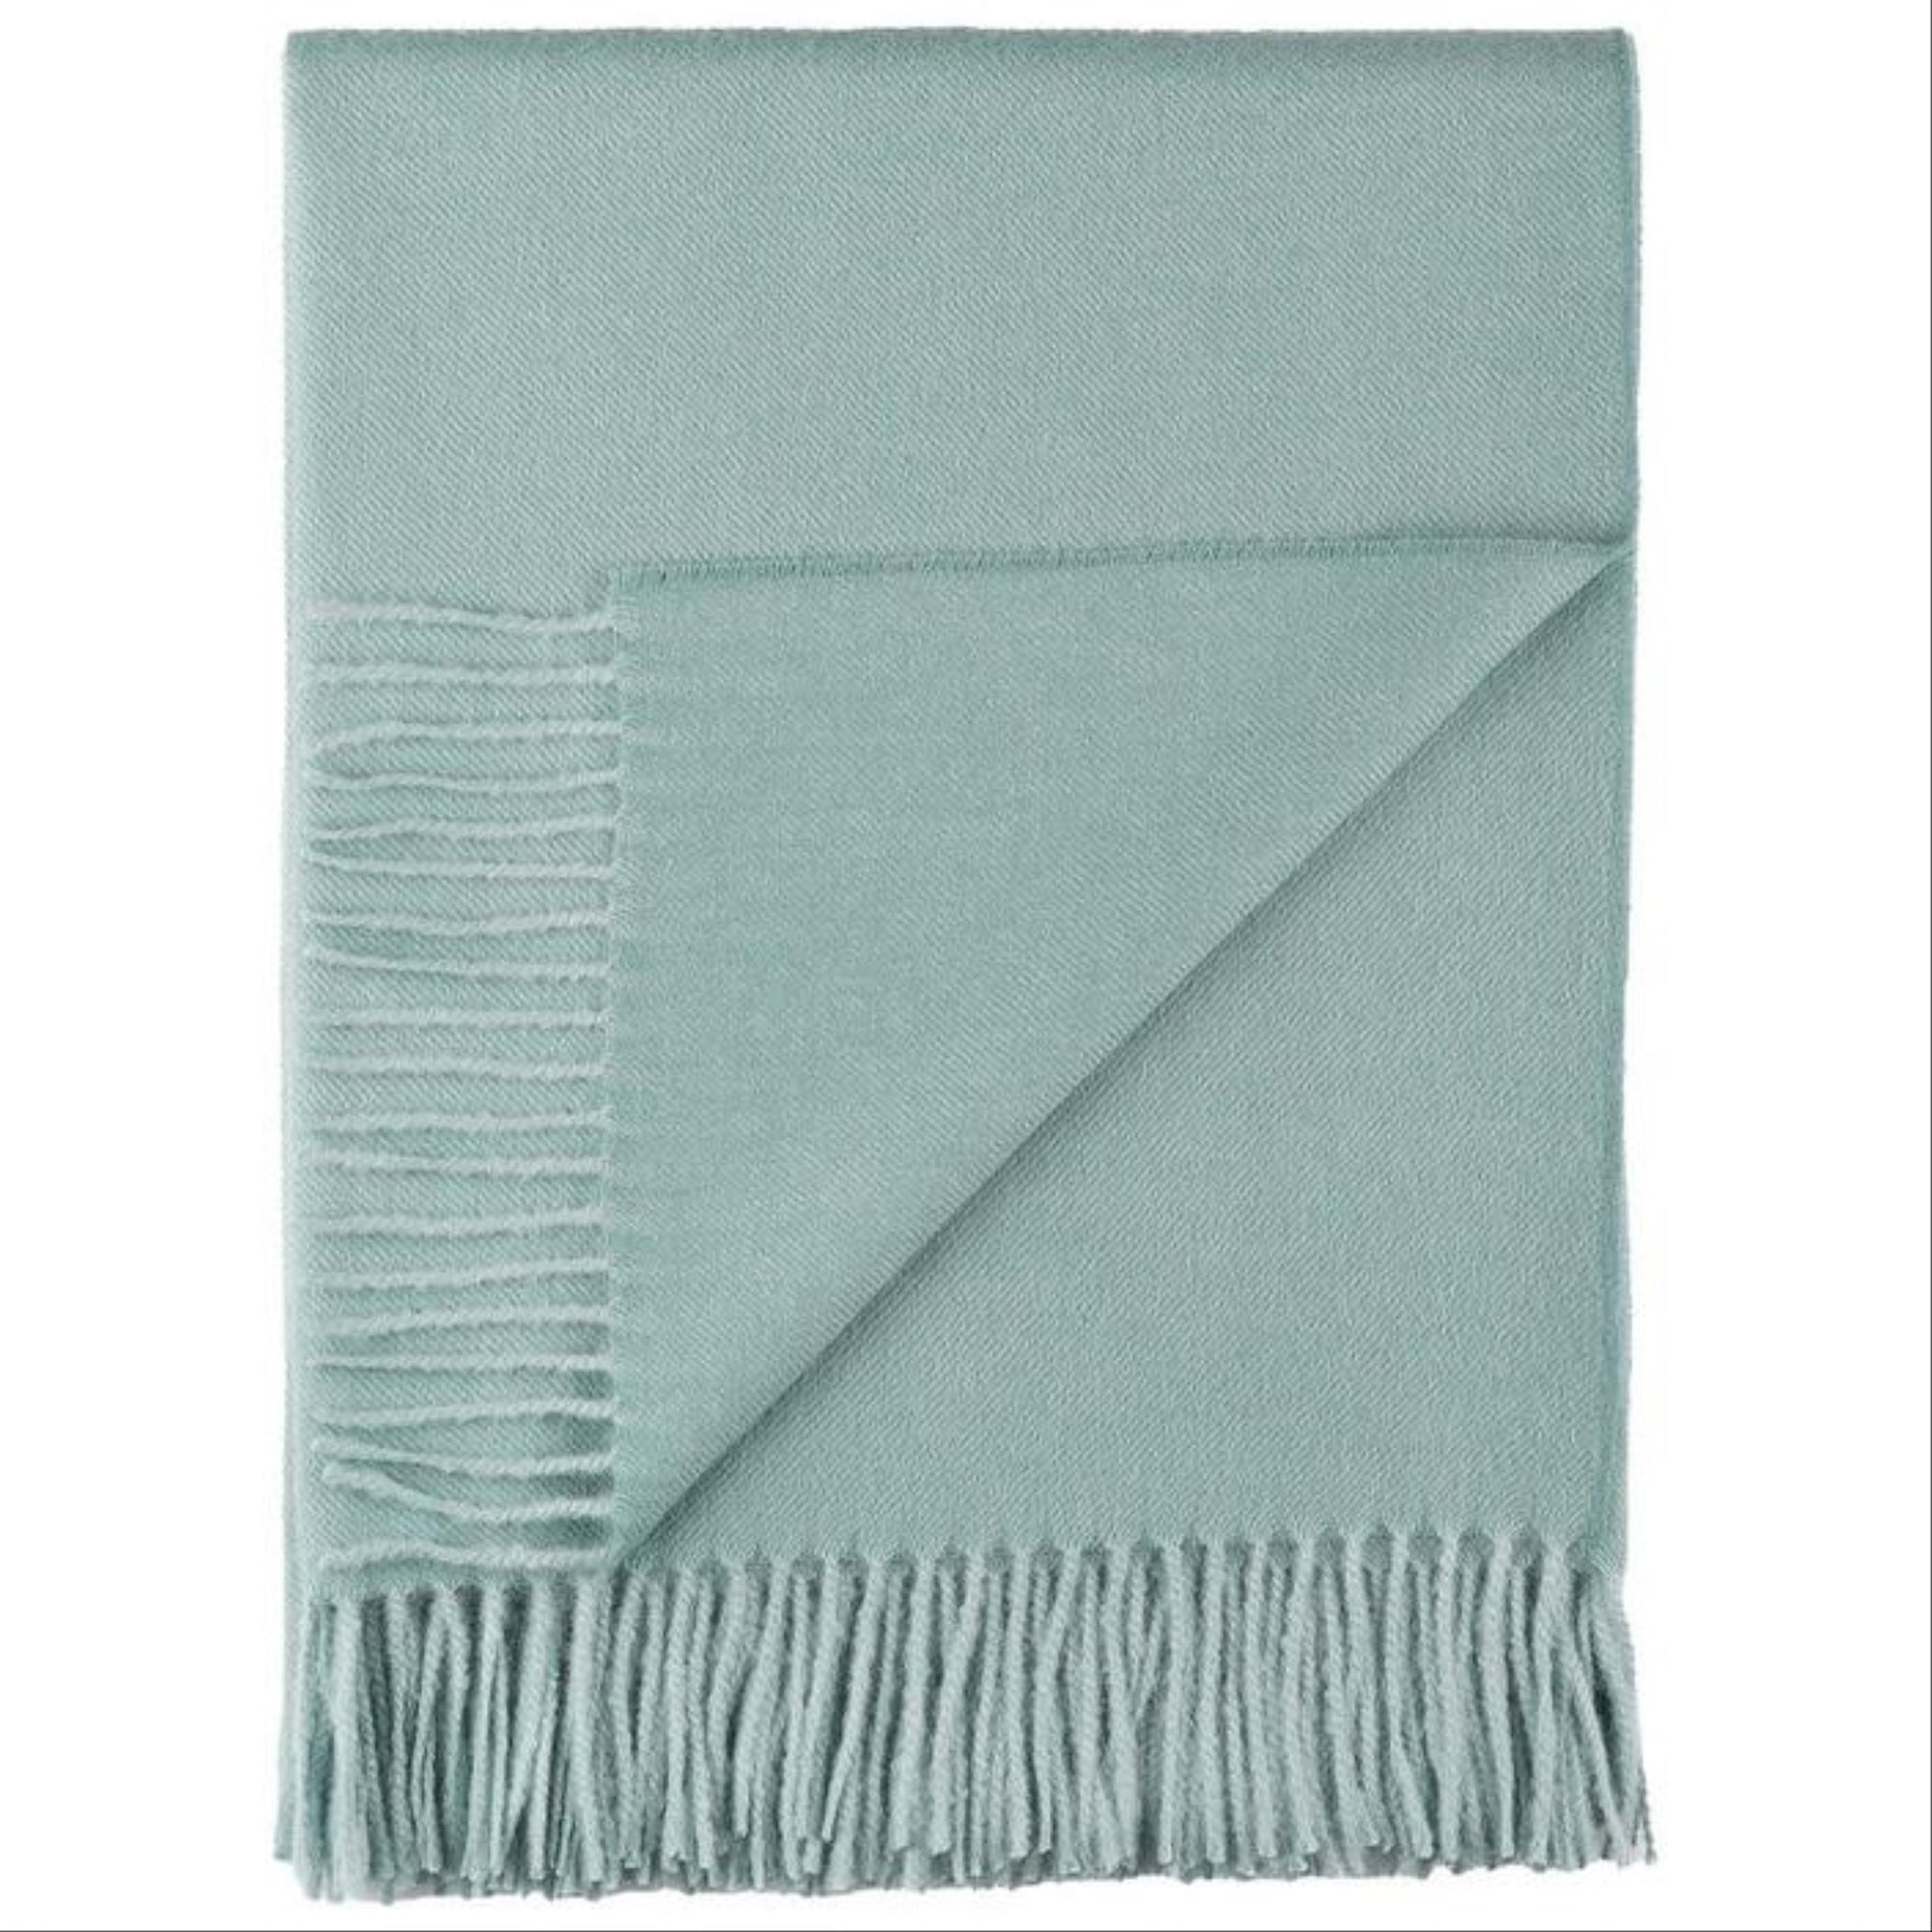 Closeup Image of Downtown Company Alpaca Throws in Sea Glass Color